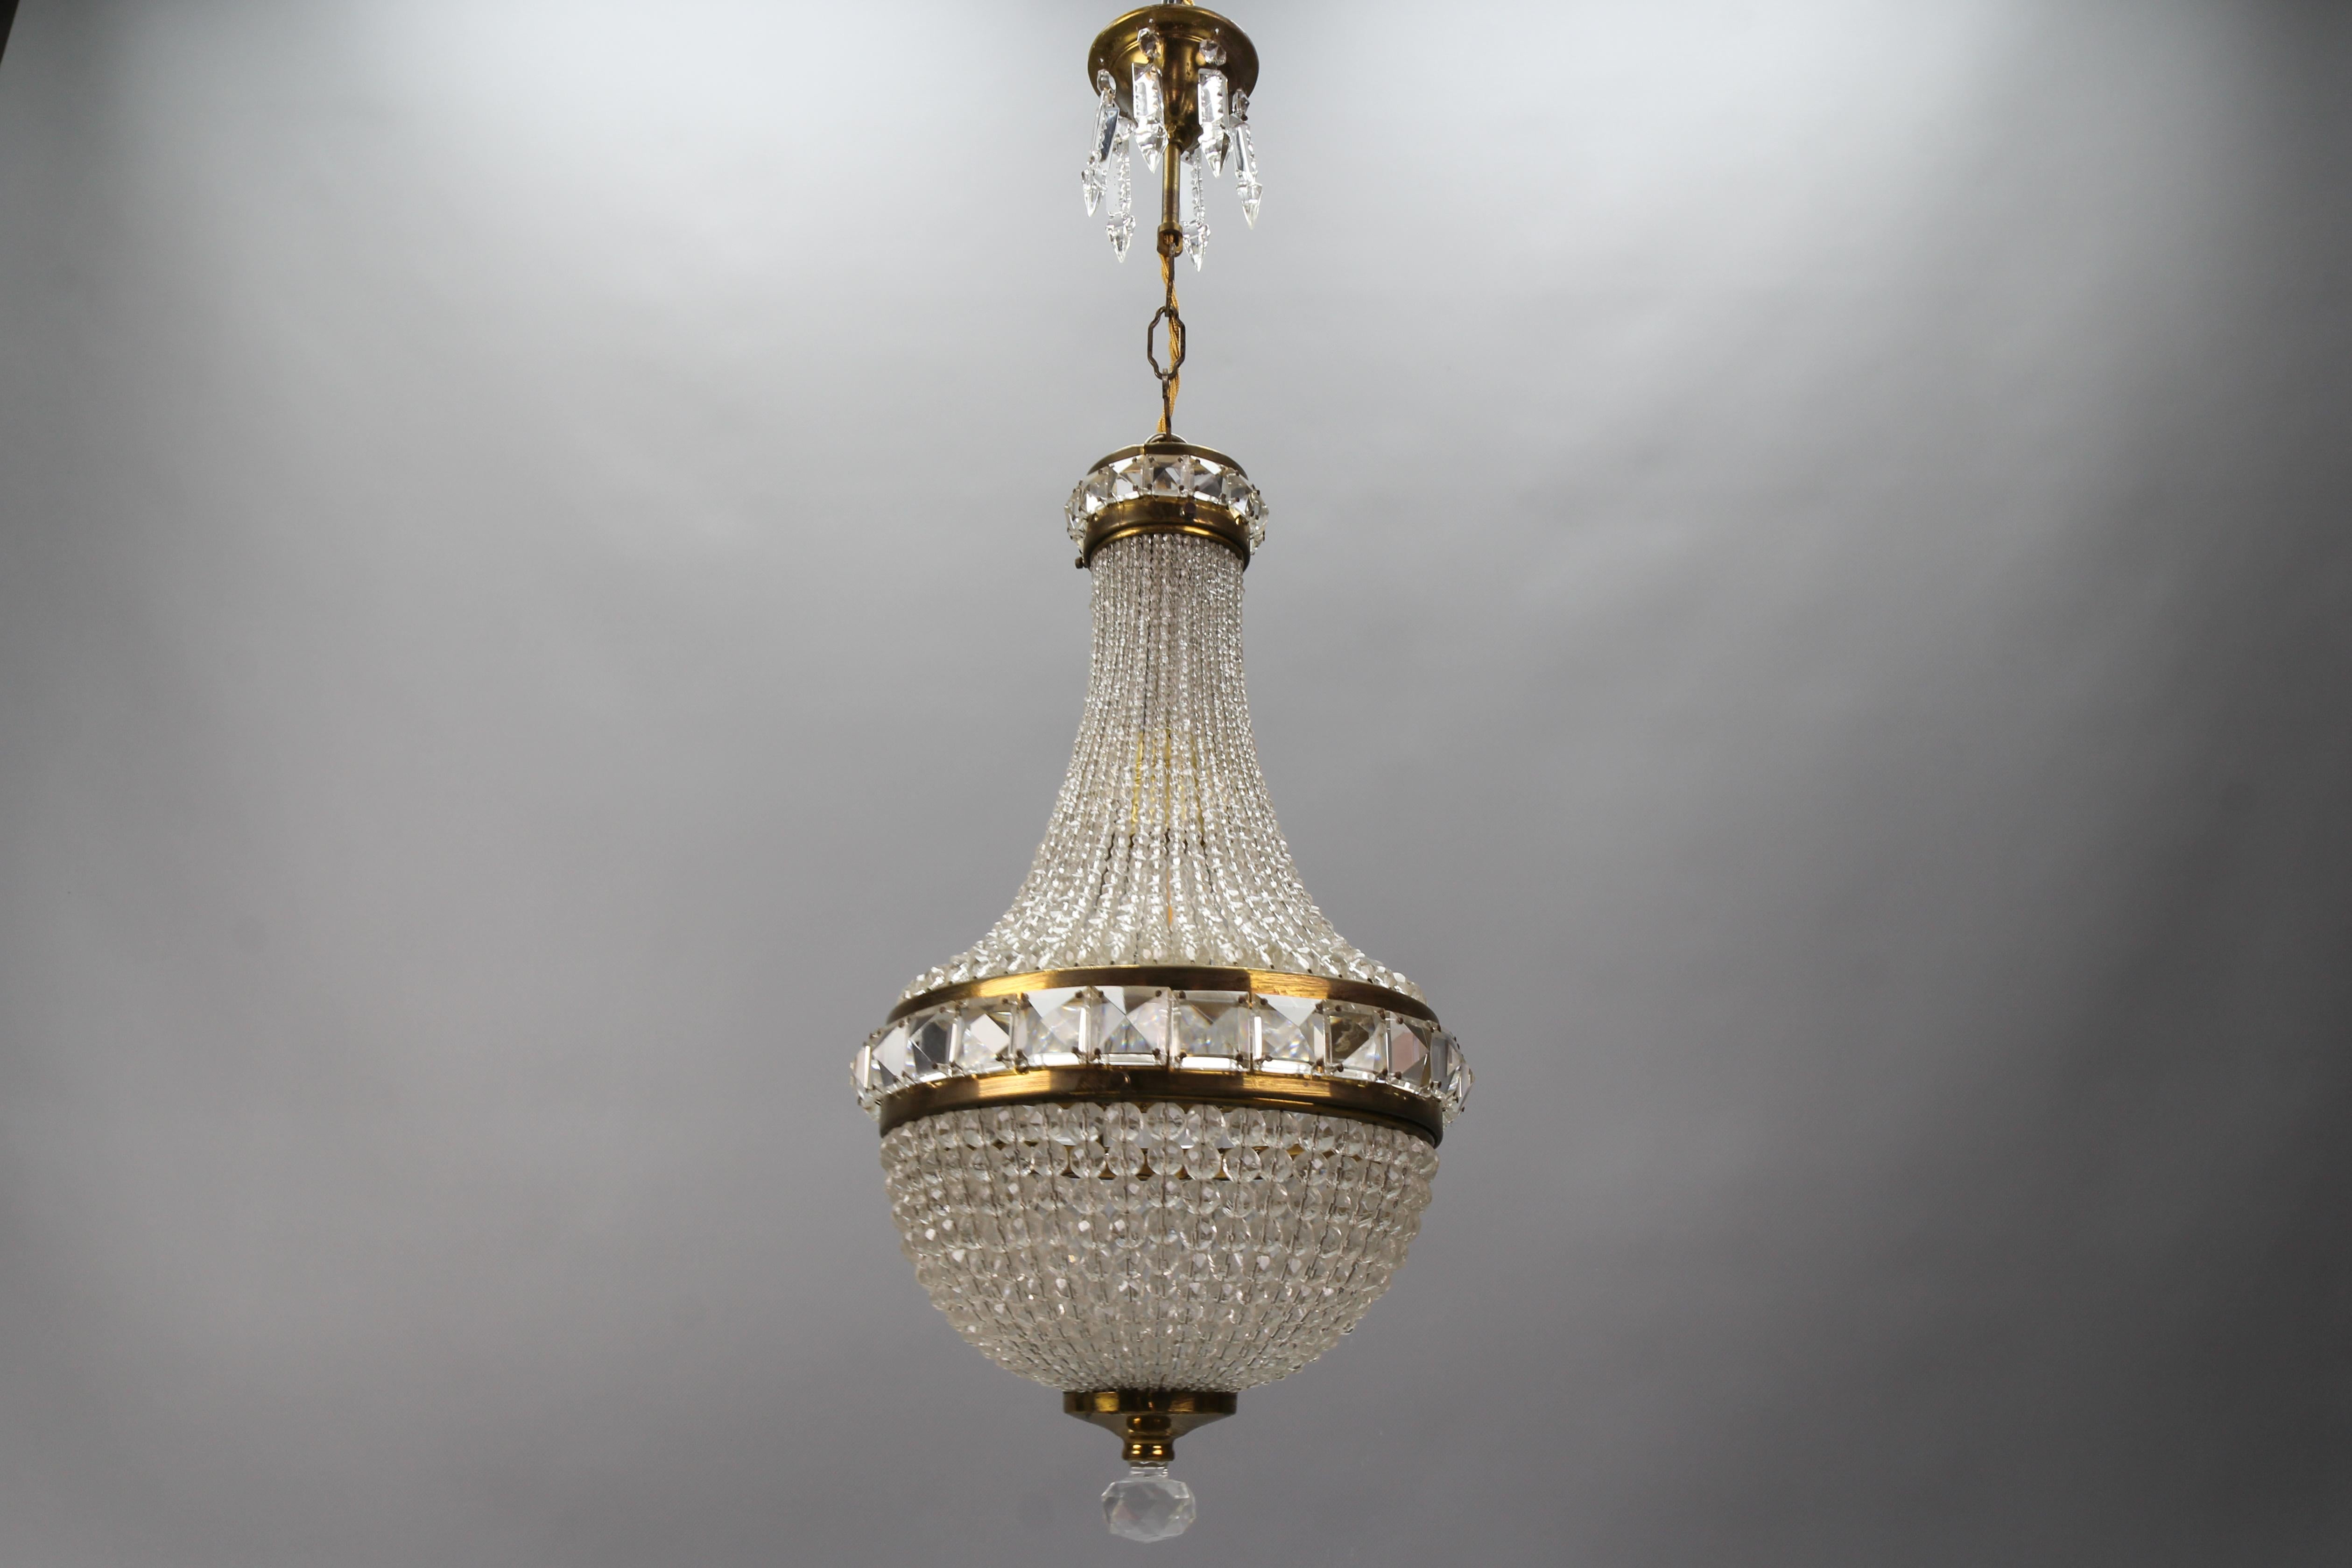 This absolutely adorable Czech crystal beaded Empire-style dome chandelier pendant from circa the 1950s consists of strands of crystal cut balls sizing from small to big. Ballroom style, the brass frame features large square prisms in the center and